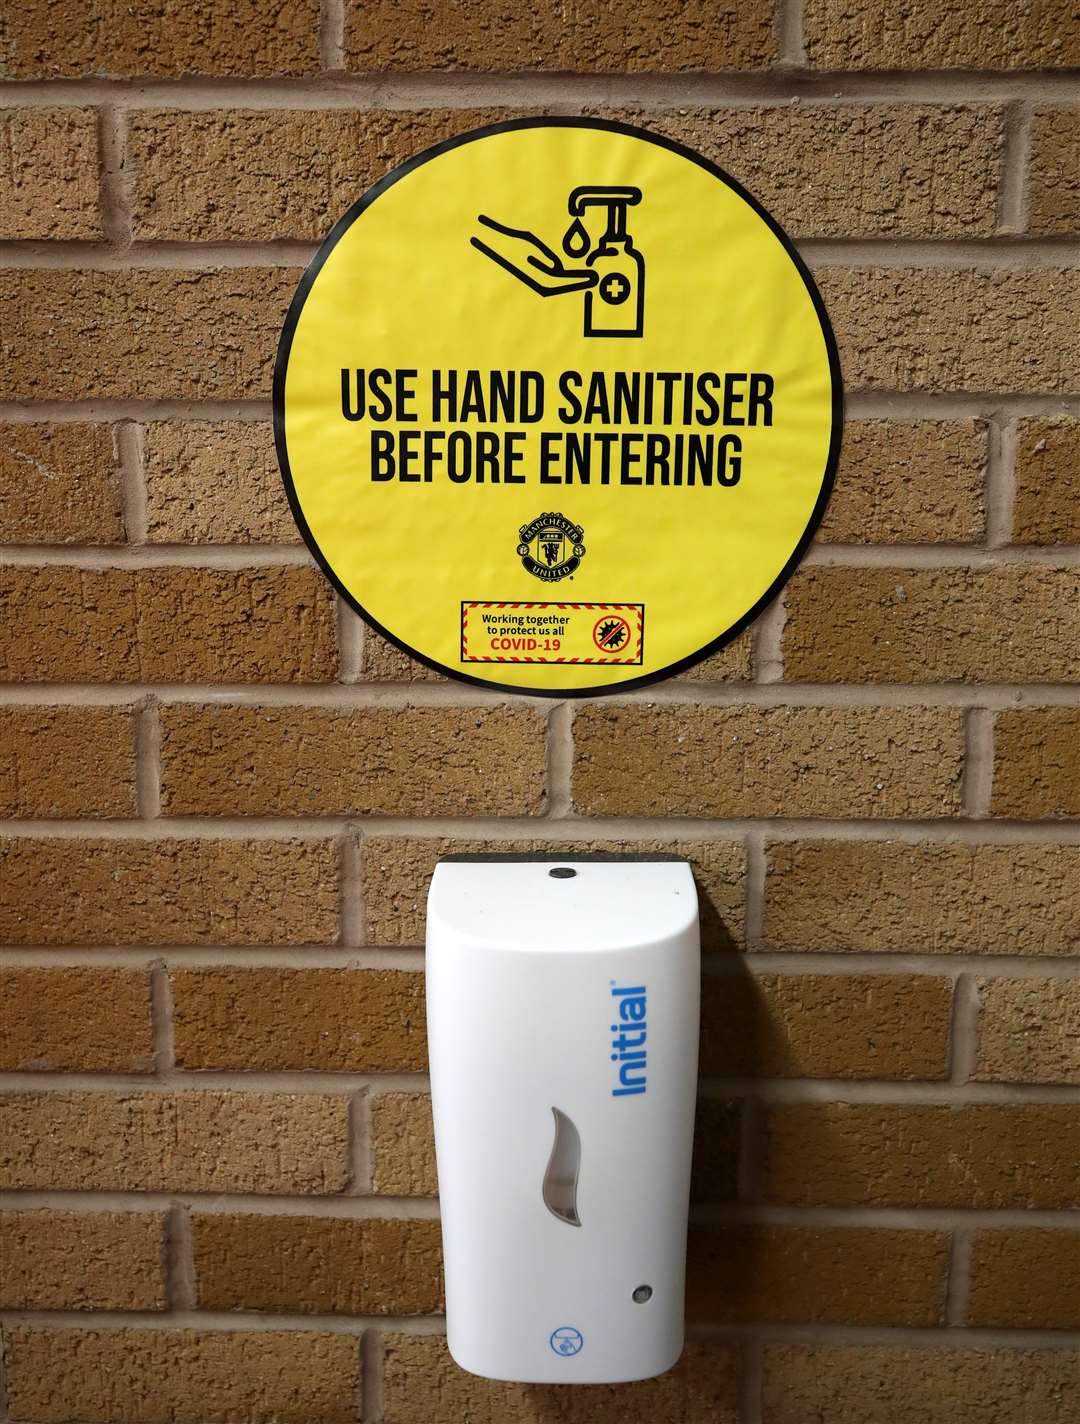 Hand sanitiser may be here to stay, experts have suggested (Nick Potts/PA).